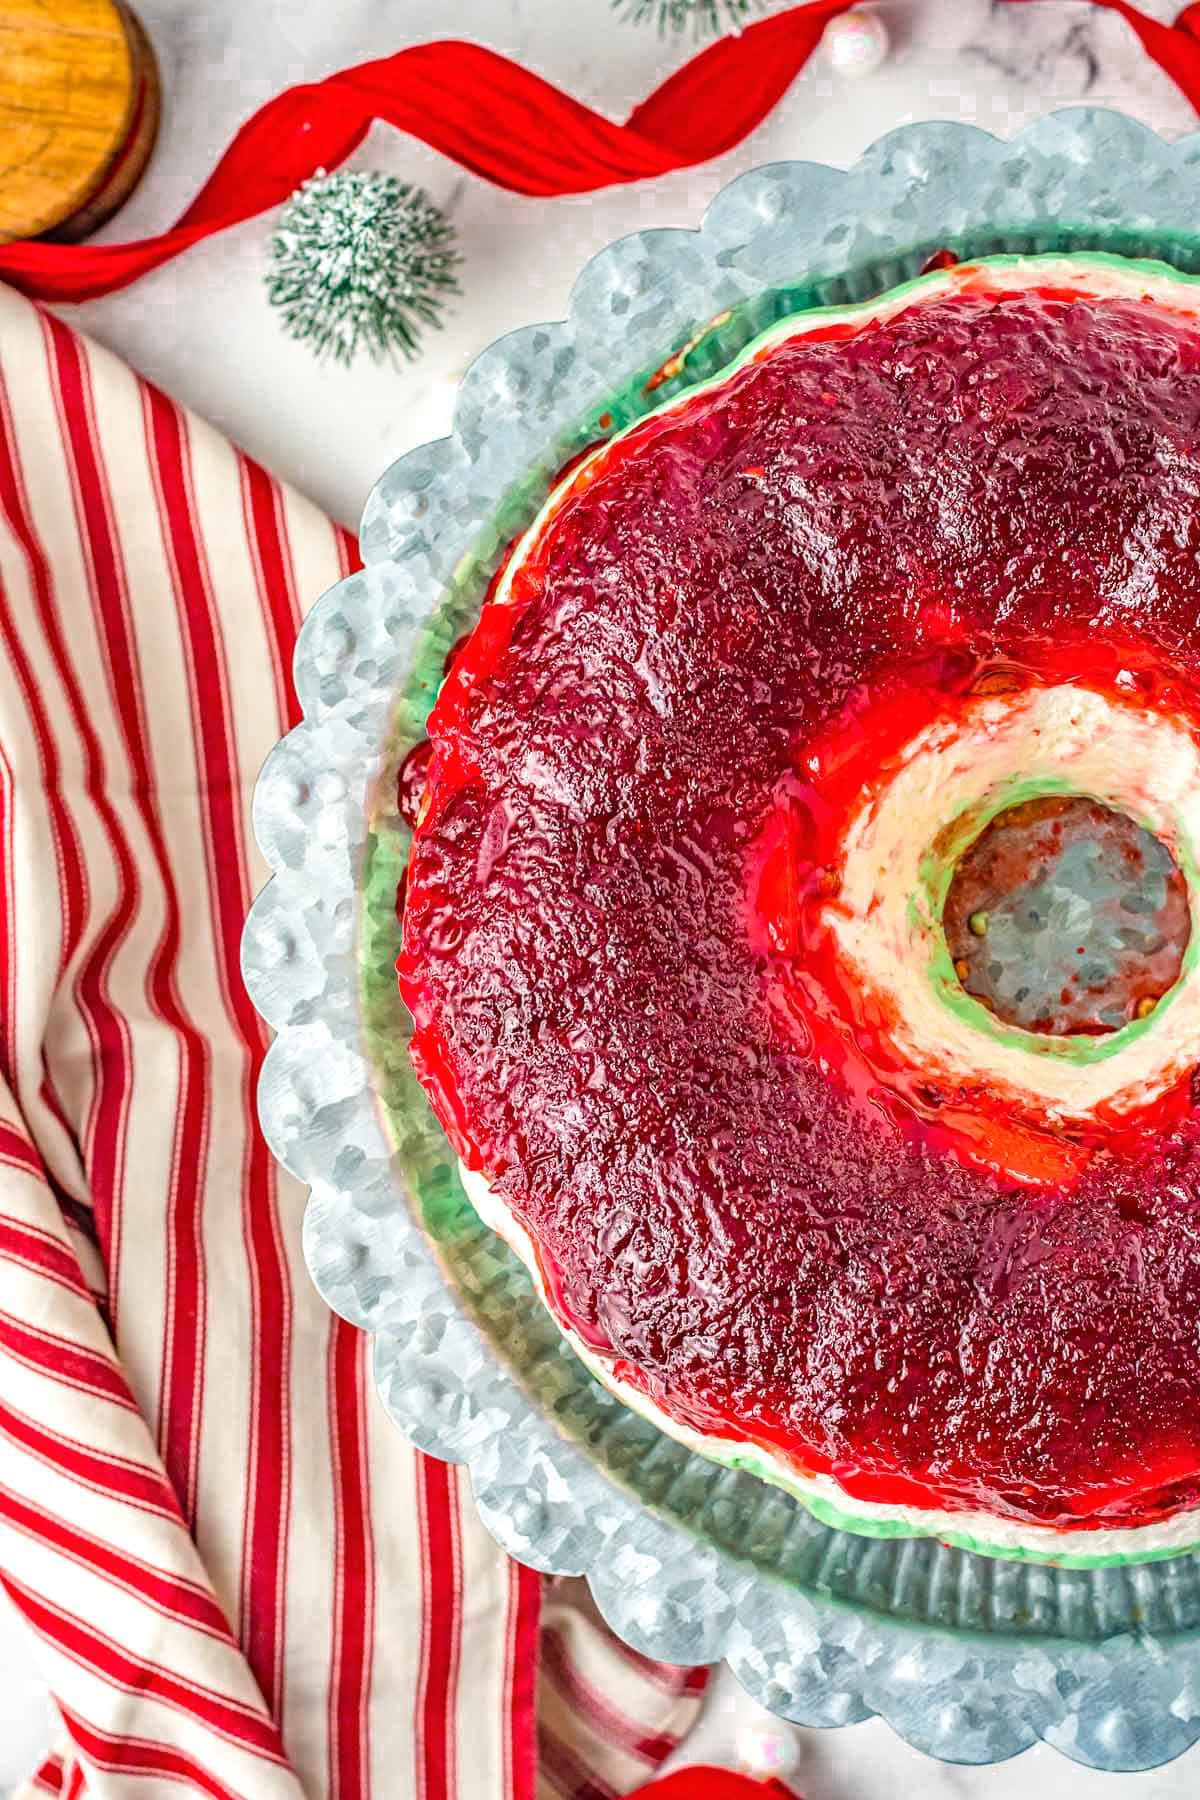 three layers of jello salad made in a bundt pan that has been placed on a galvanized metal cake stand and is ready to serve.